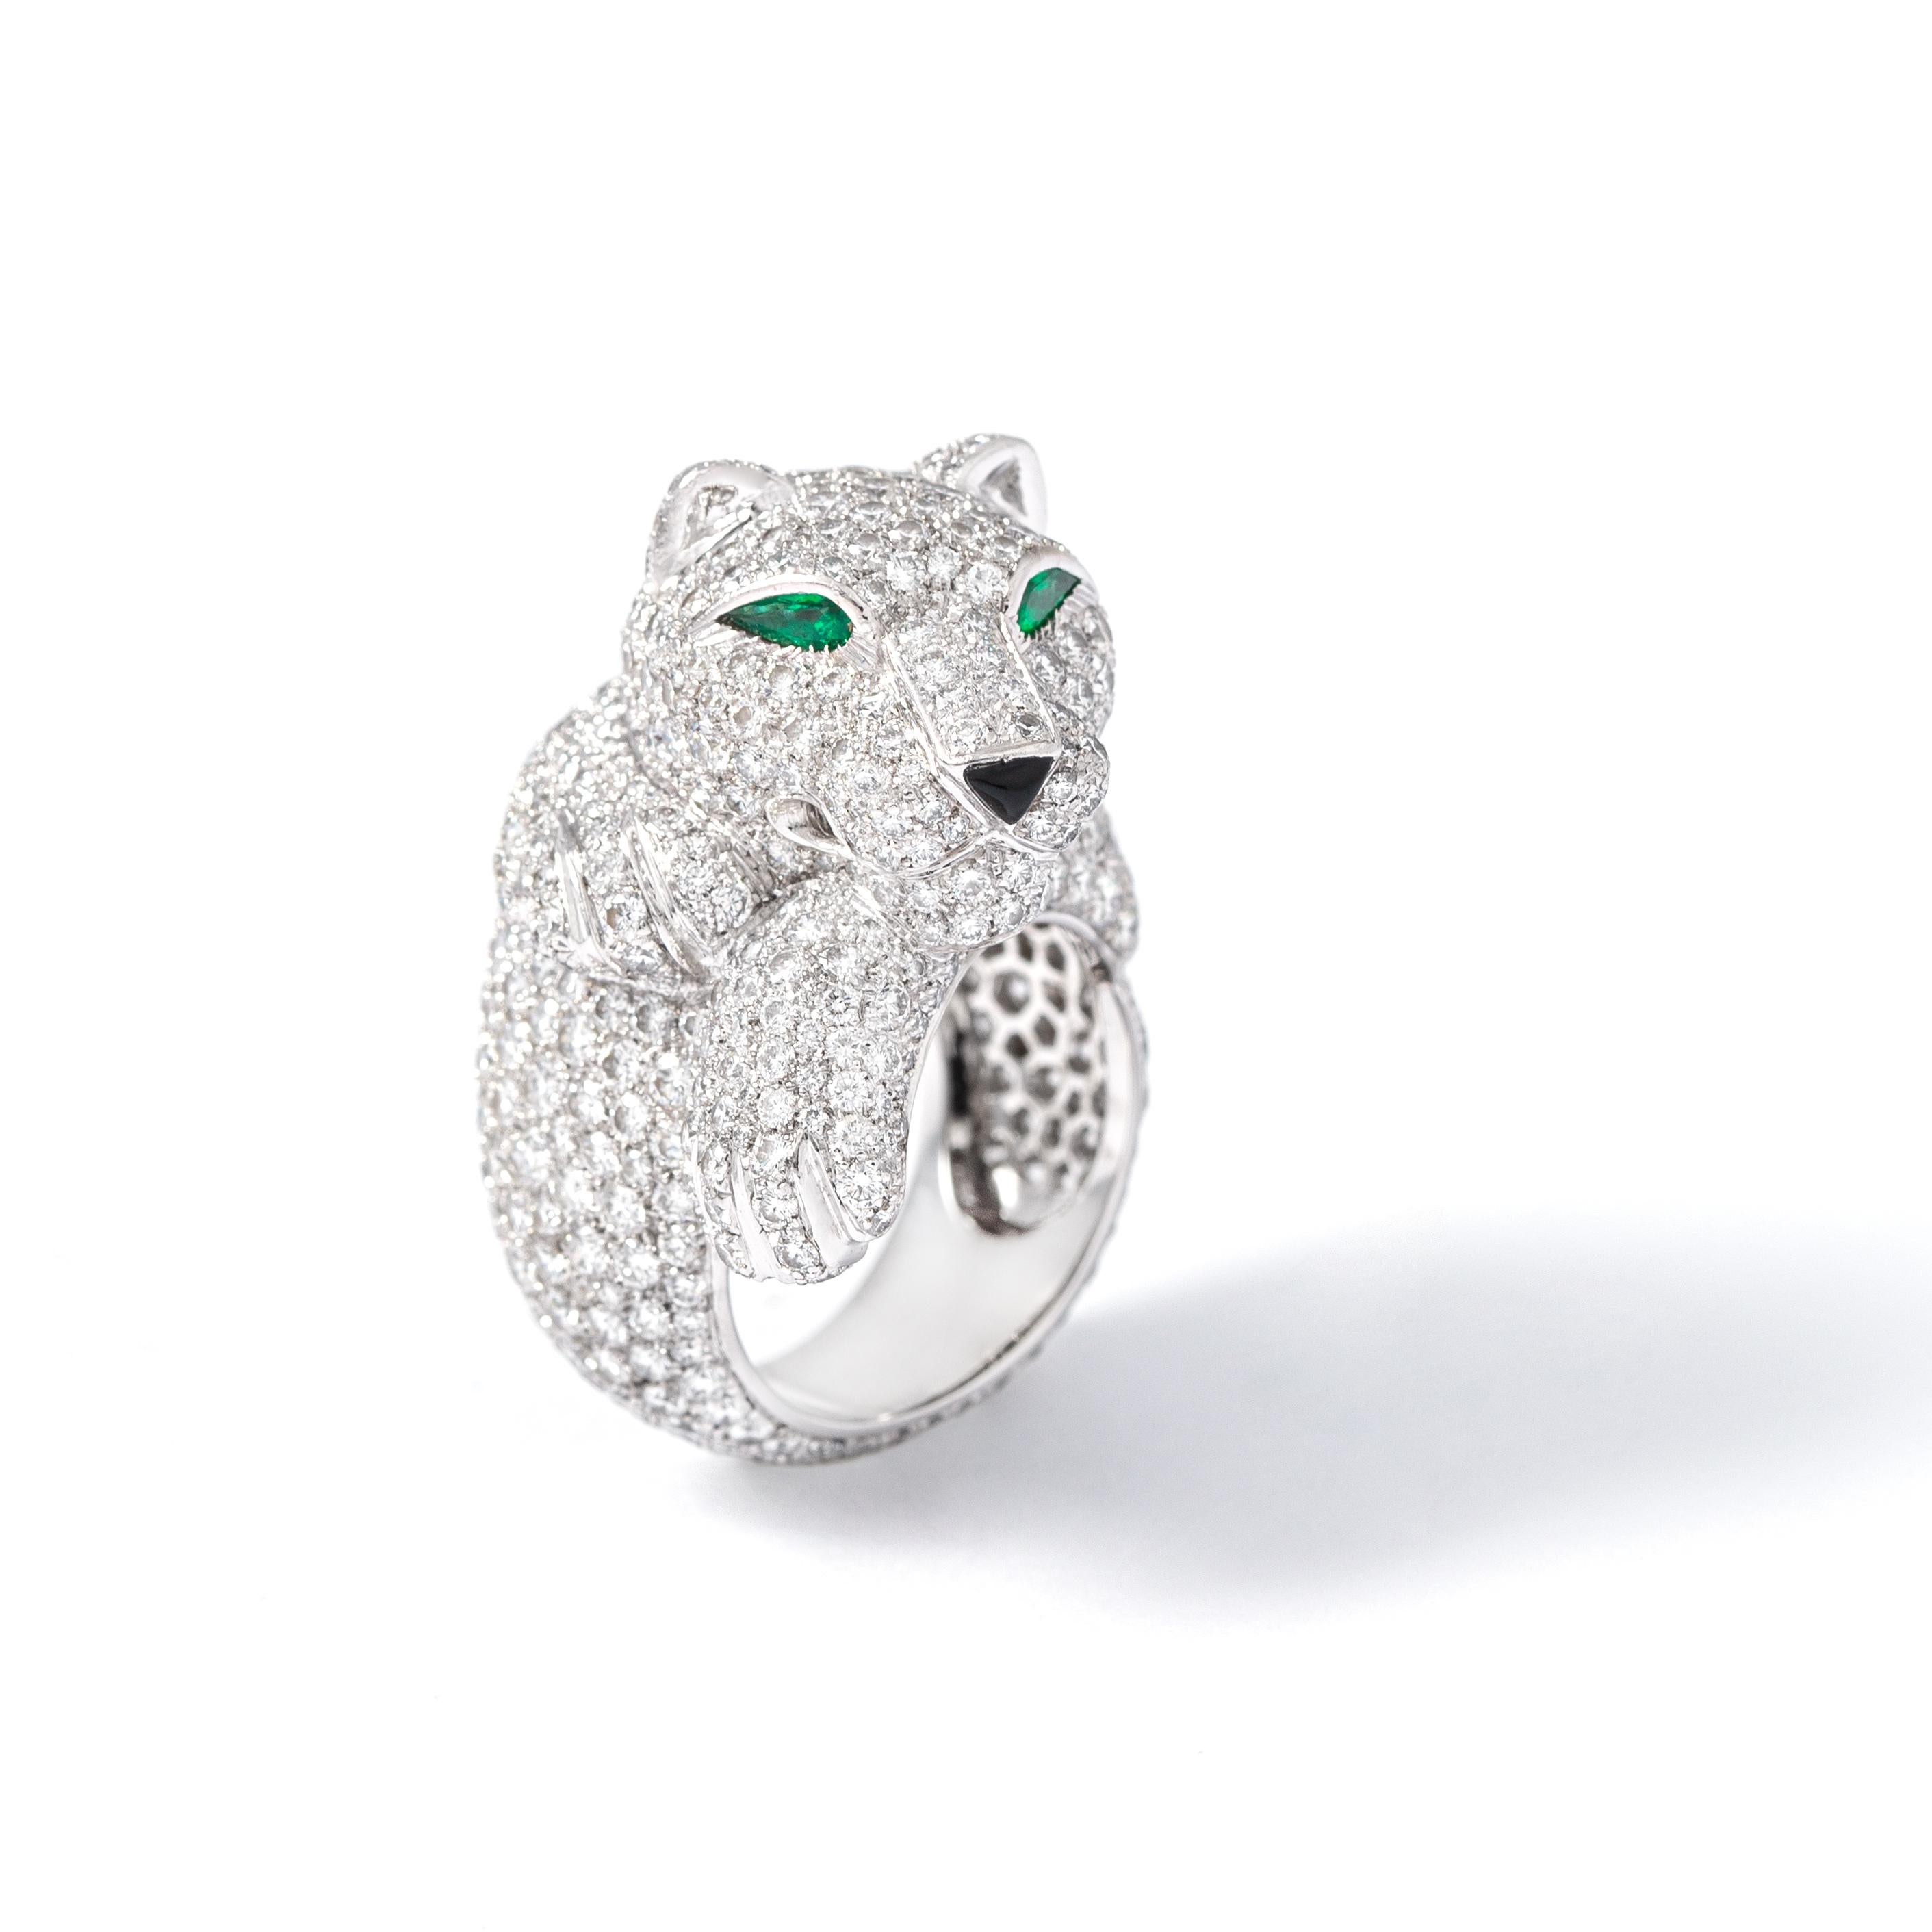 Cartier Panthere Pave Diamond Emerald White Gold Ring

18K white gold Ring overall set with round Diamonds representing a panther, the eyes in emerald and the nose in onyx.
Signed Cartier. French mark (eagle head) and maker's mark. Numbered 78048B.